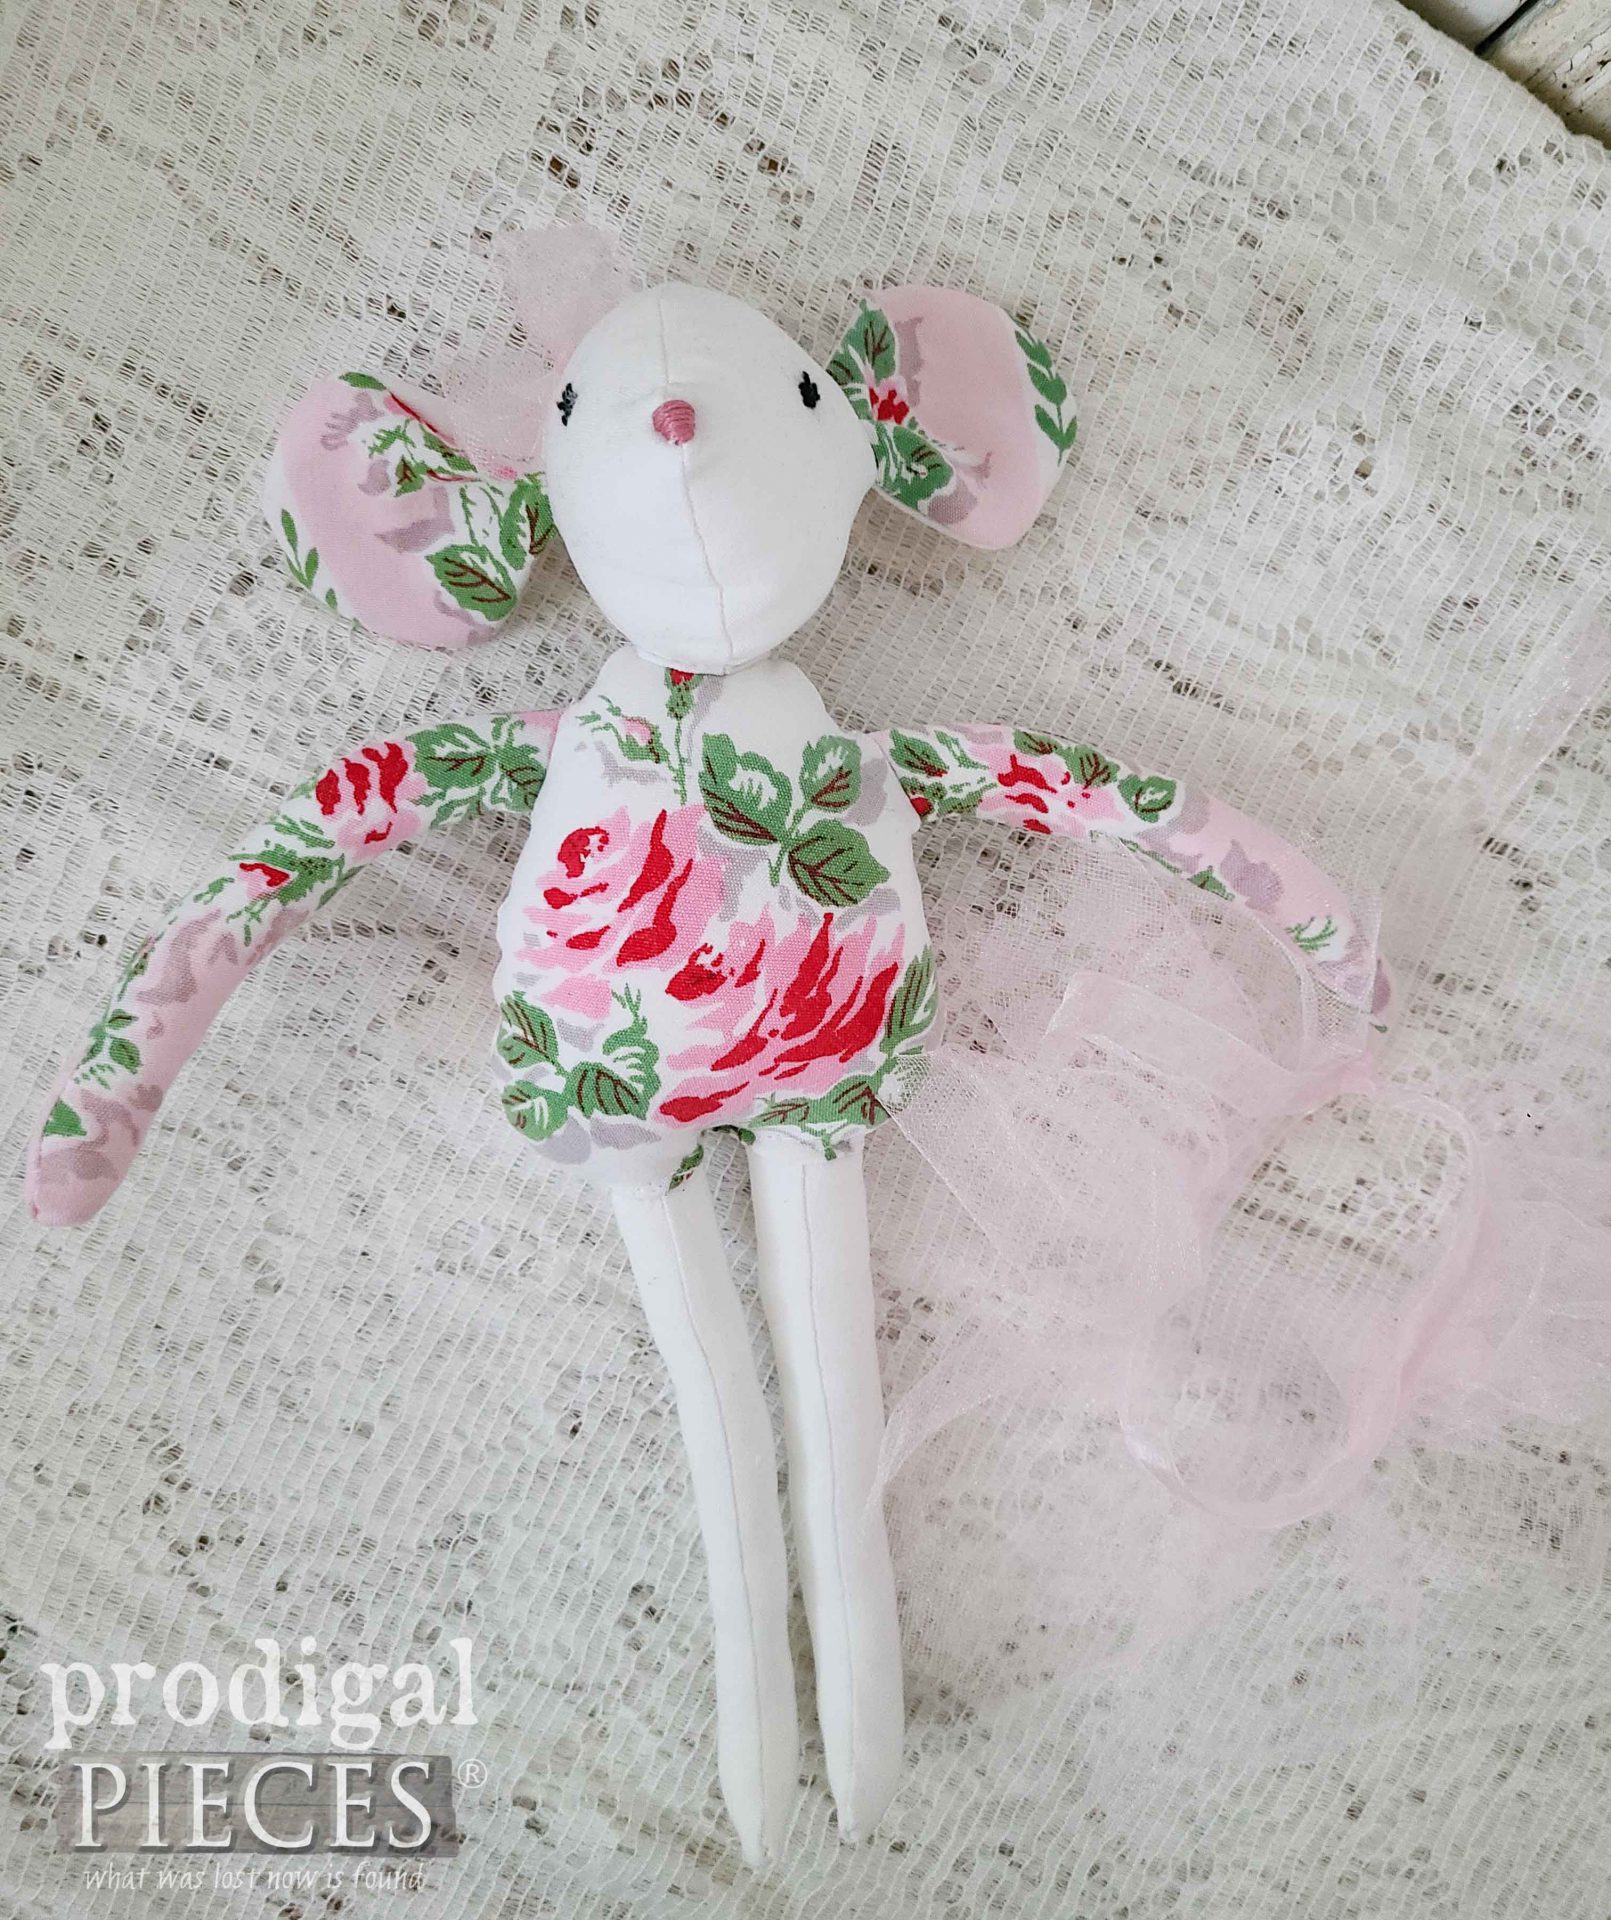 Pink Rose Ballerina Mouse Doll with Removable Tutu by Larissa of Prodigal Pieces | prodigalpieces.com #prodigalpieces #rose #ballerina